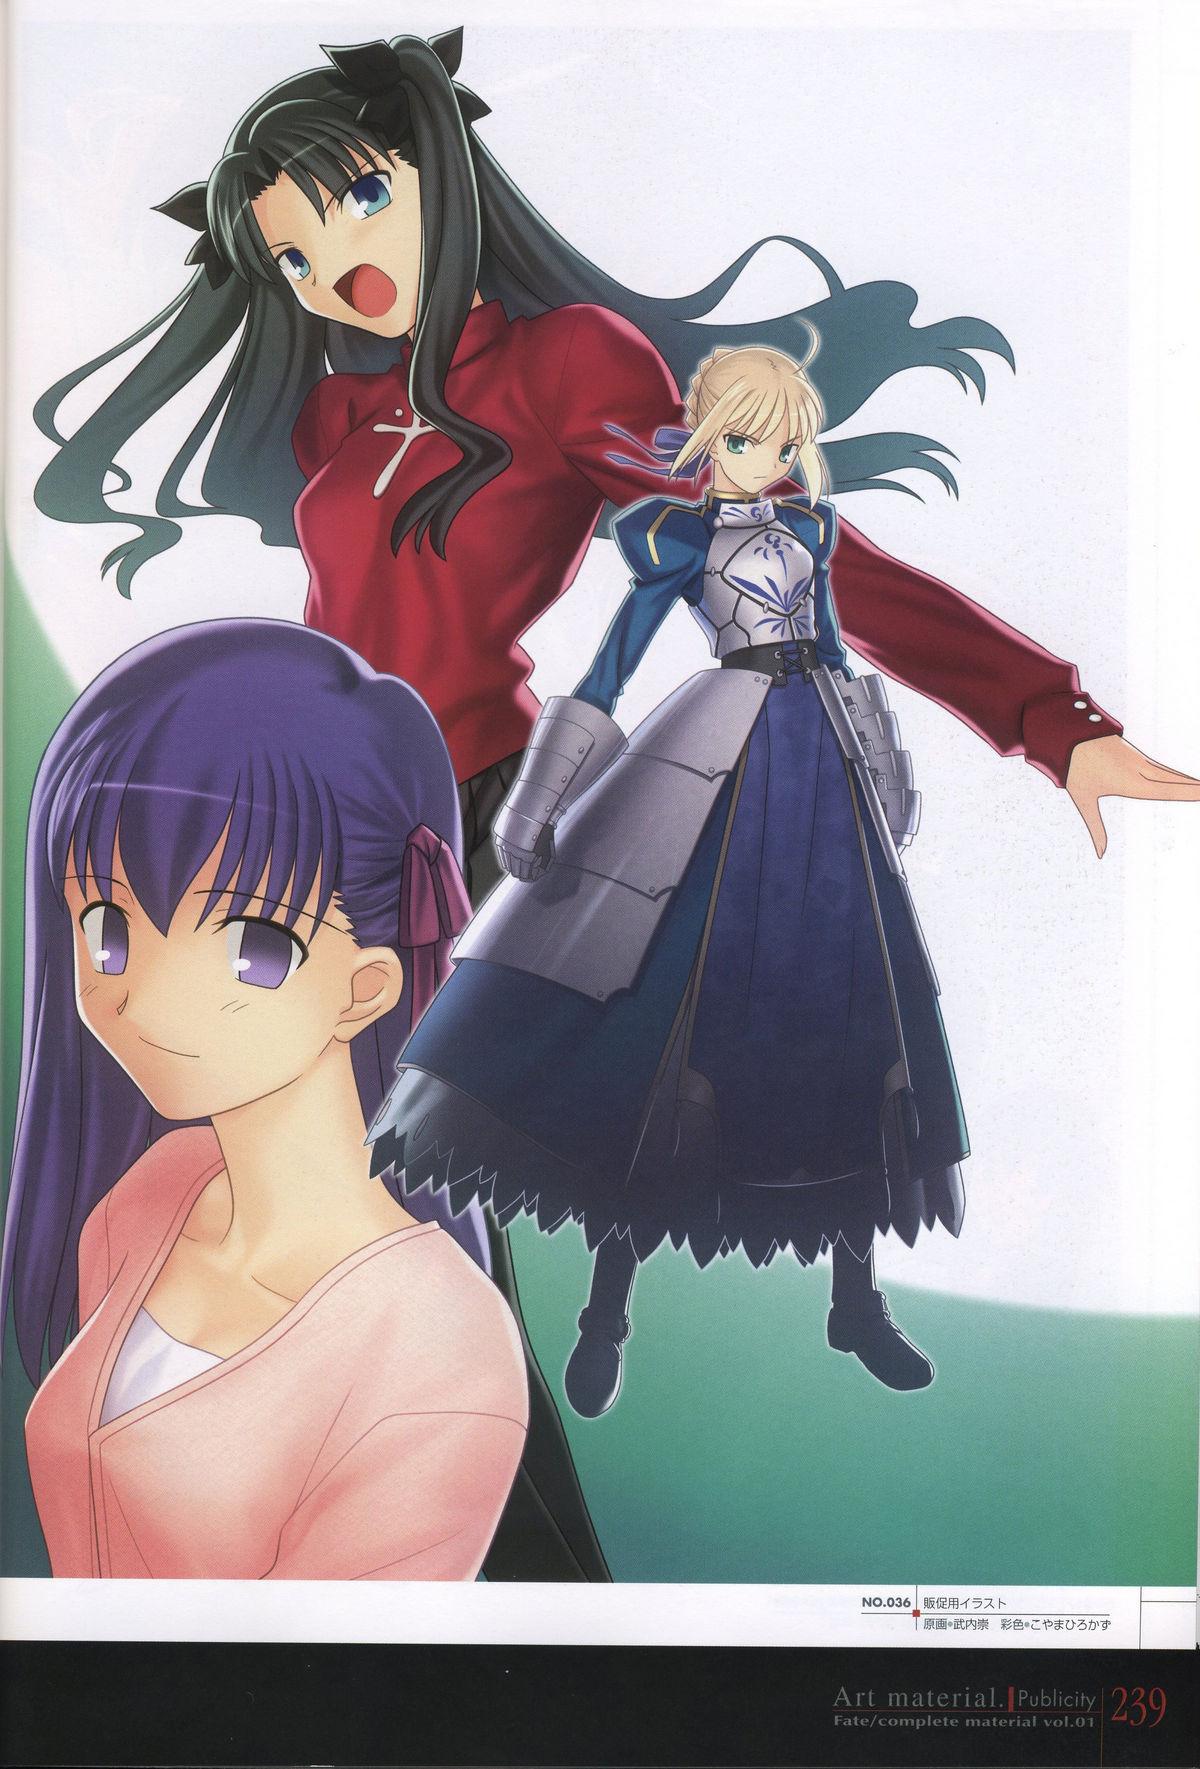 Fate/complete material I - Art material. 243